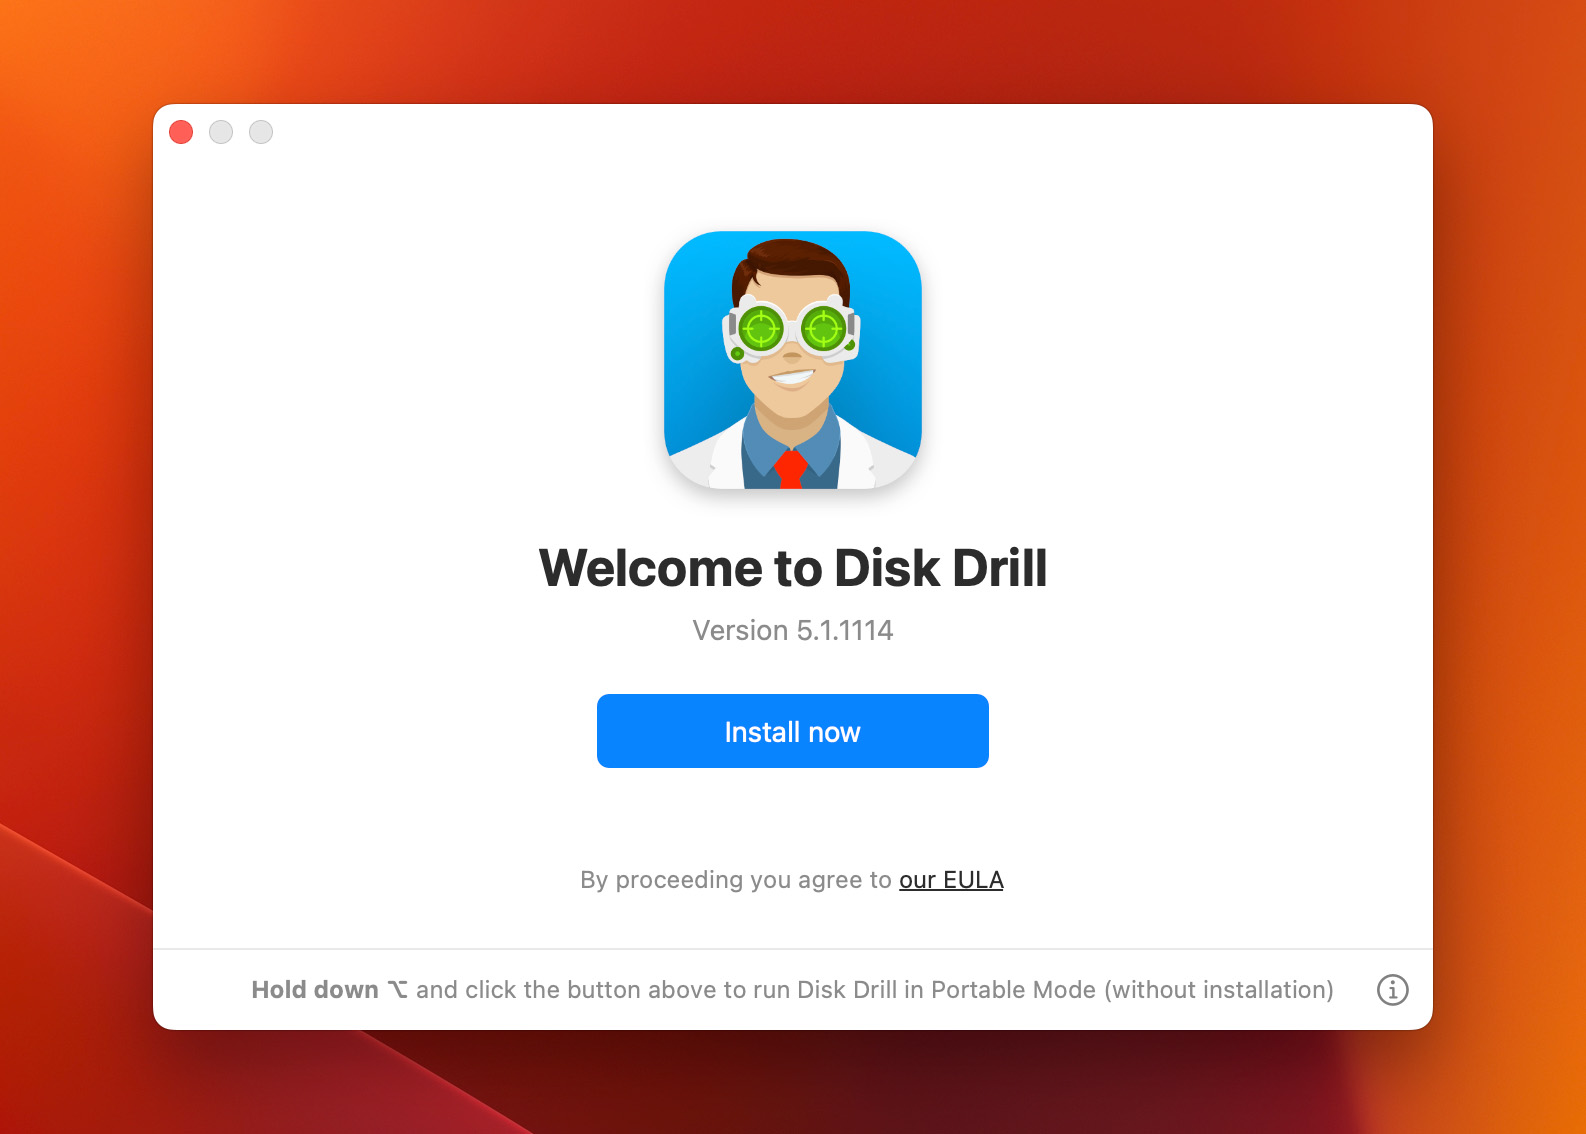 Download and install Disk Drill